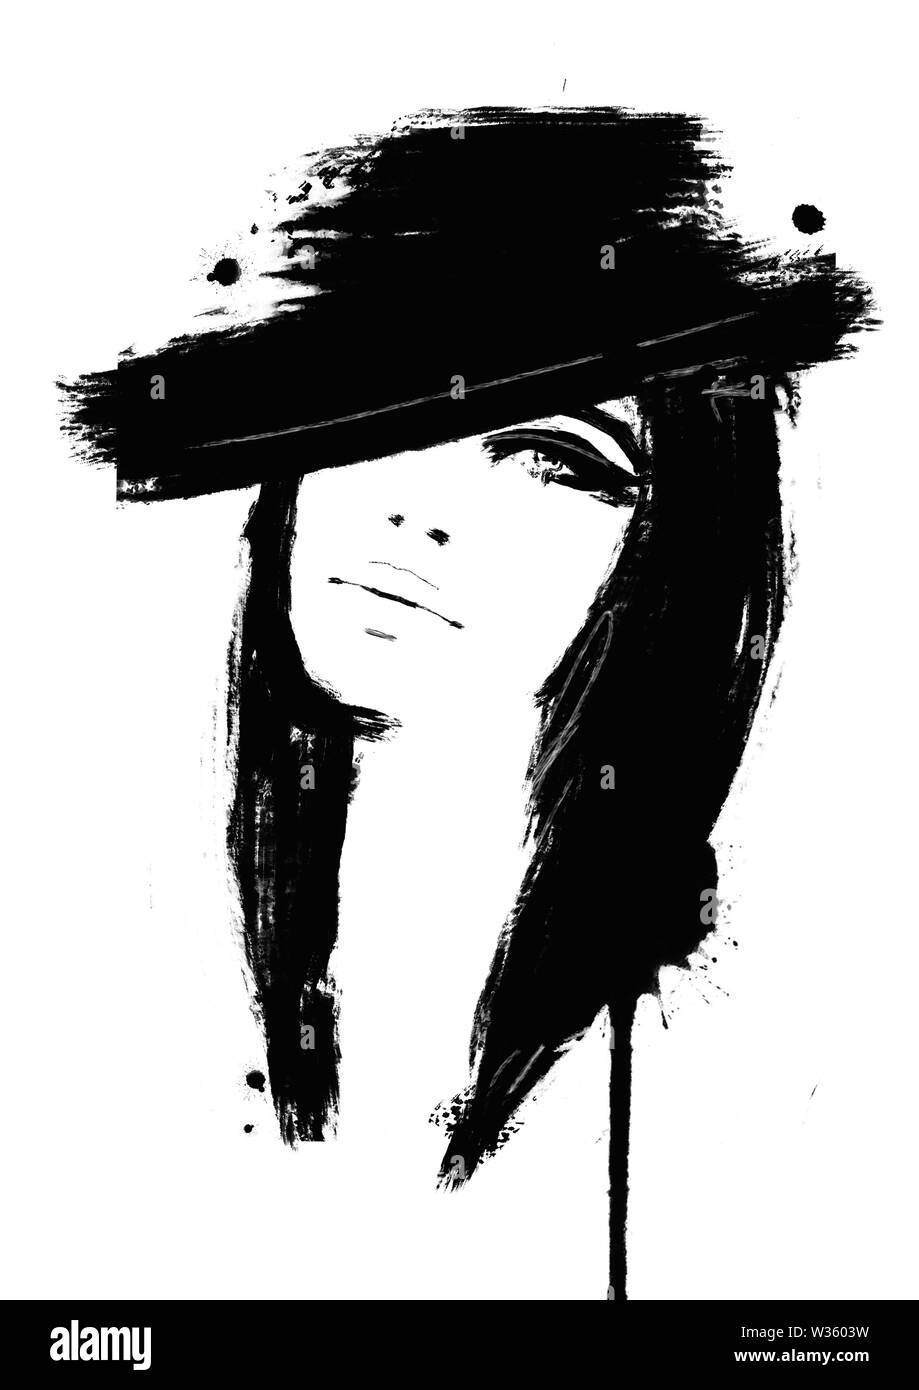 Fashion Illustration Black And White Fashion Sketch Abstract Painting Woman Fashion Background Girl With Hat Smokey Eye Face Big Brush Strokes Stock Photo Alamy